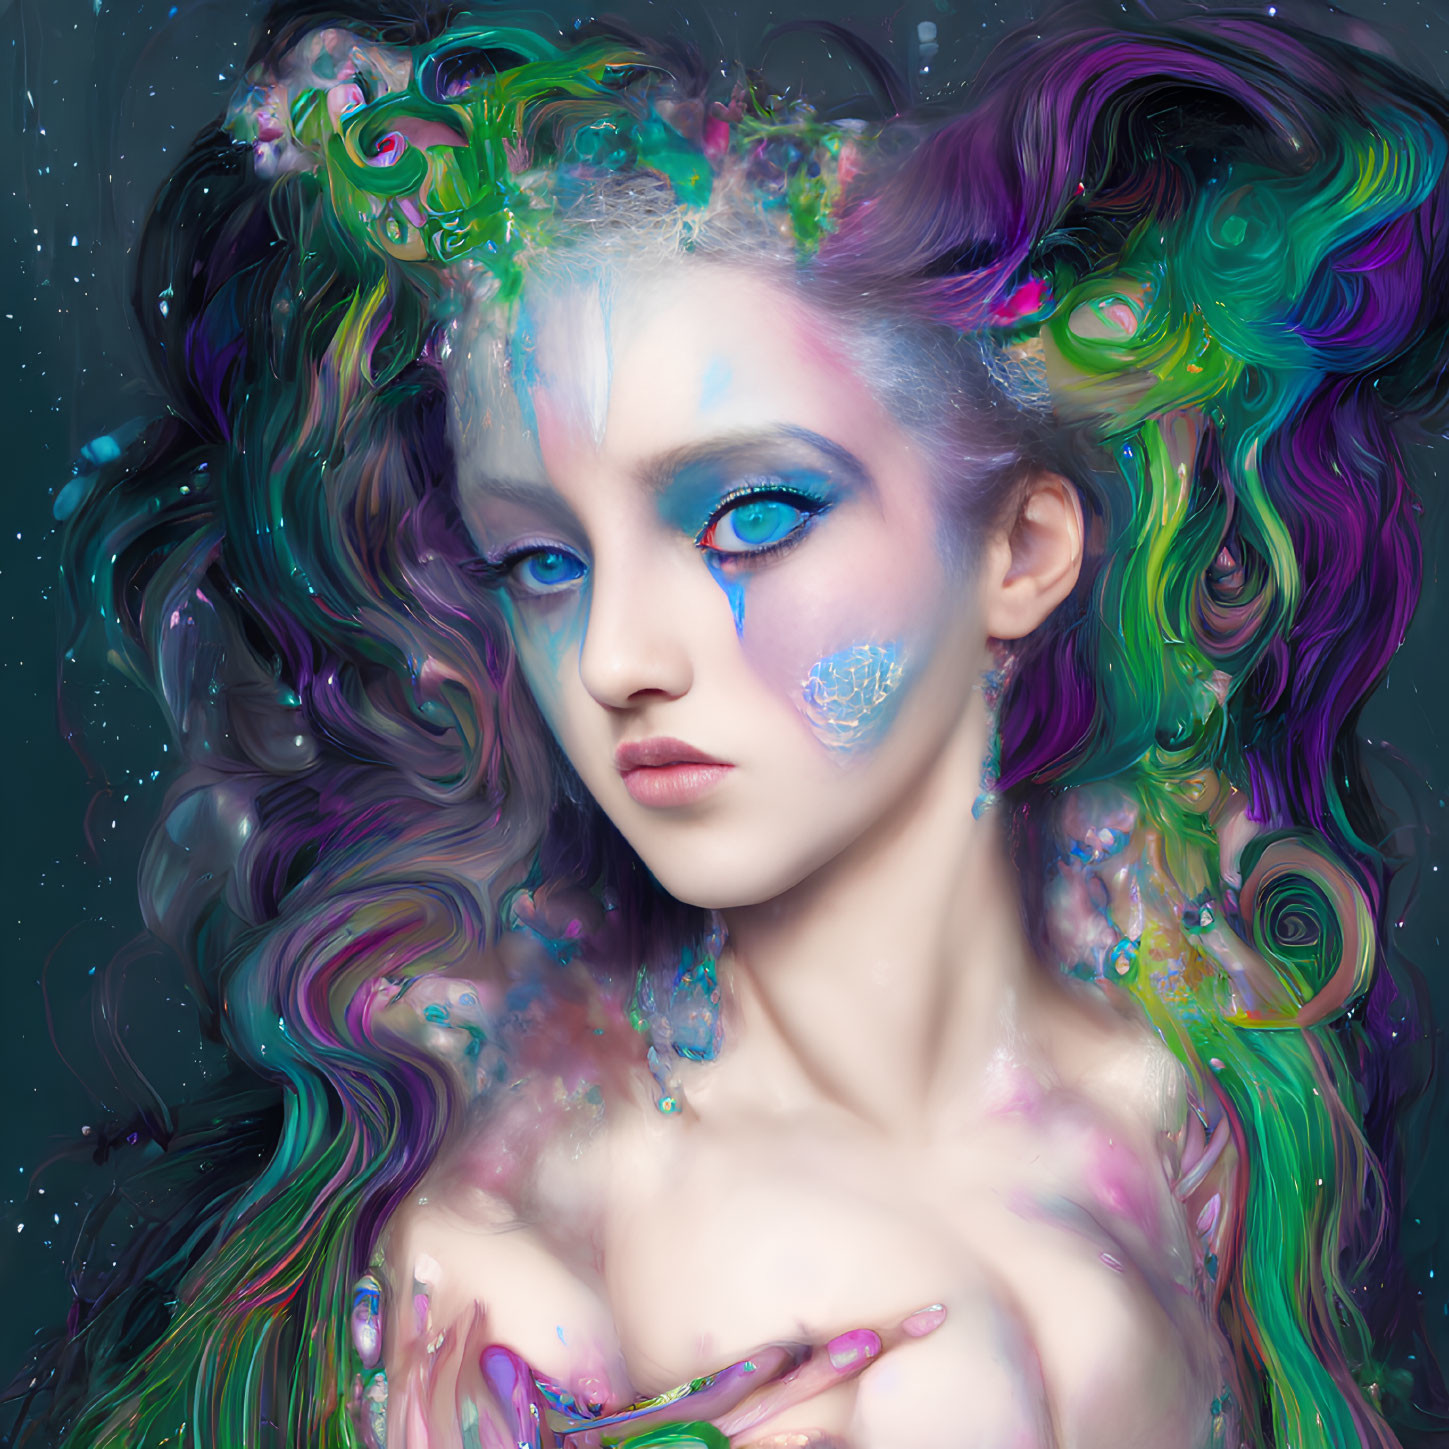 Colorful digital artwork of woman with cosmic-themed makeup and vibrant multicolored hair.